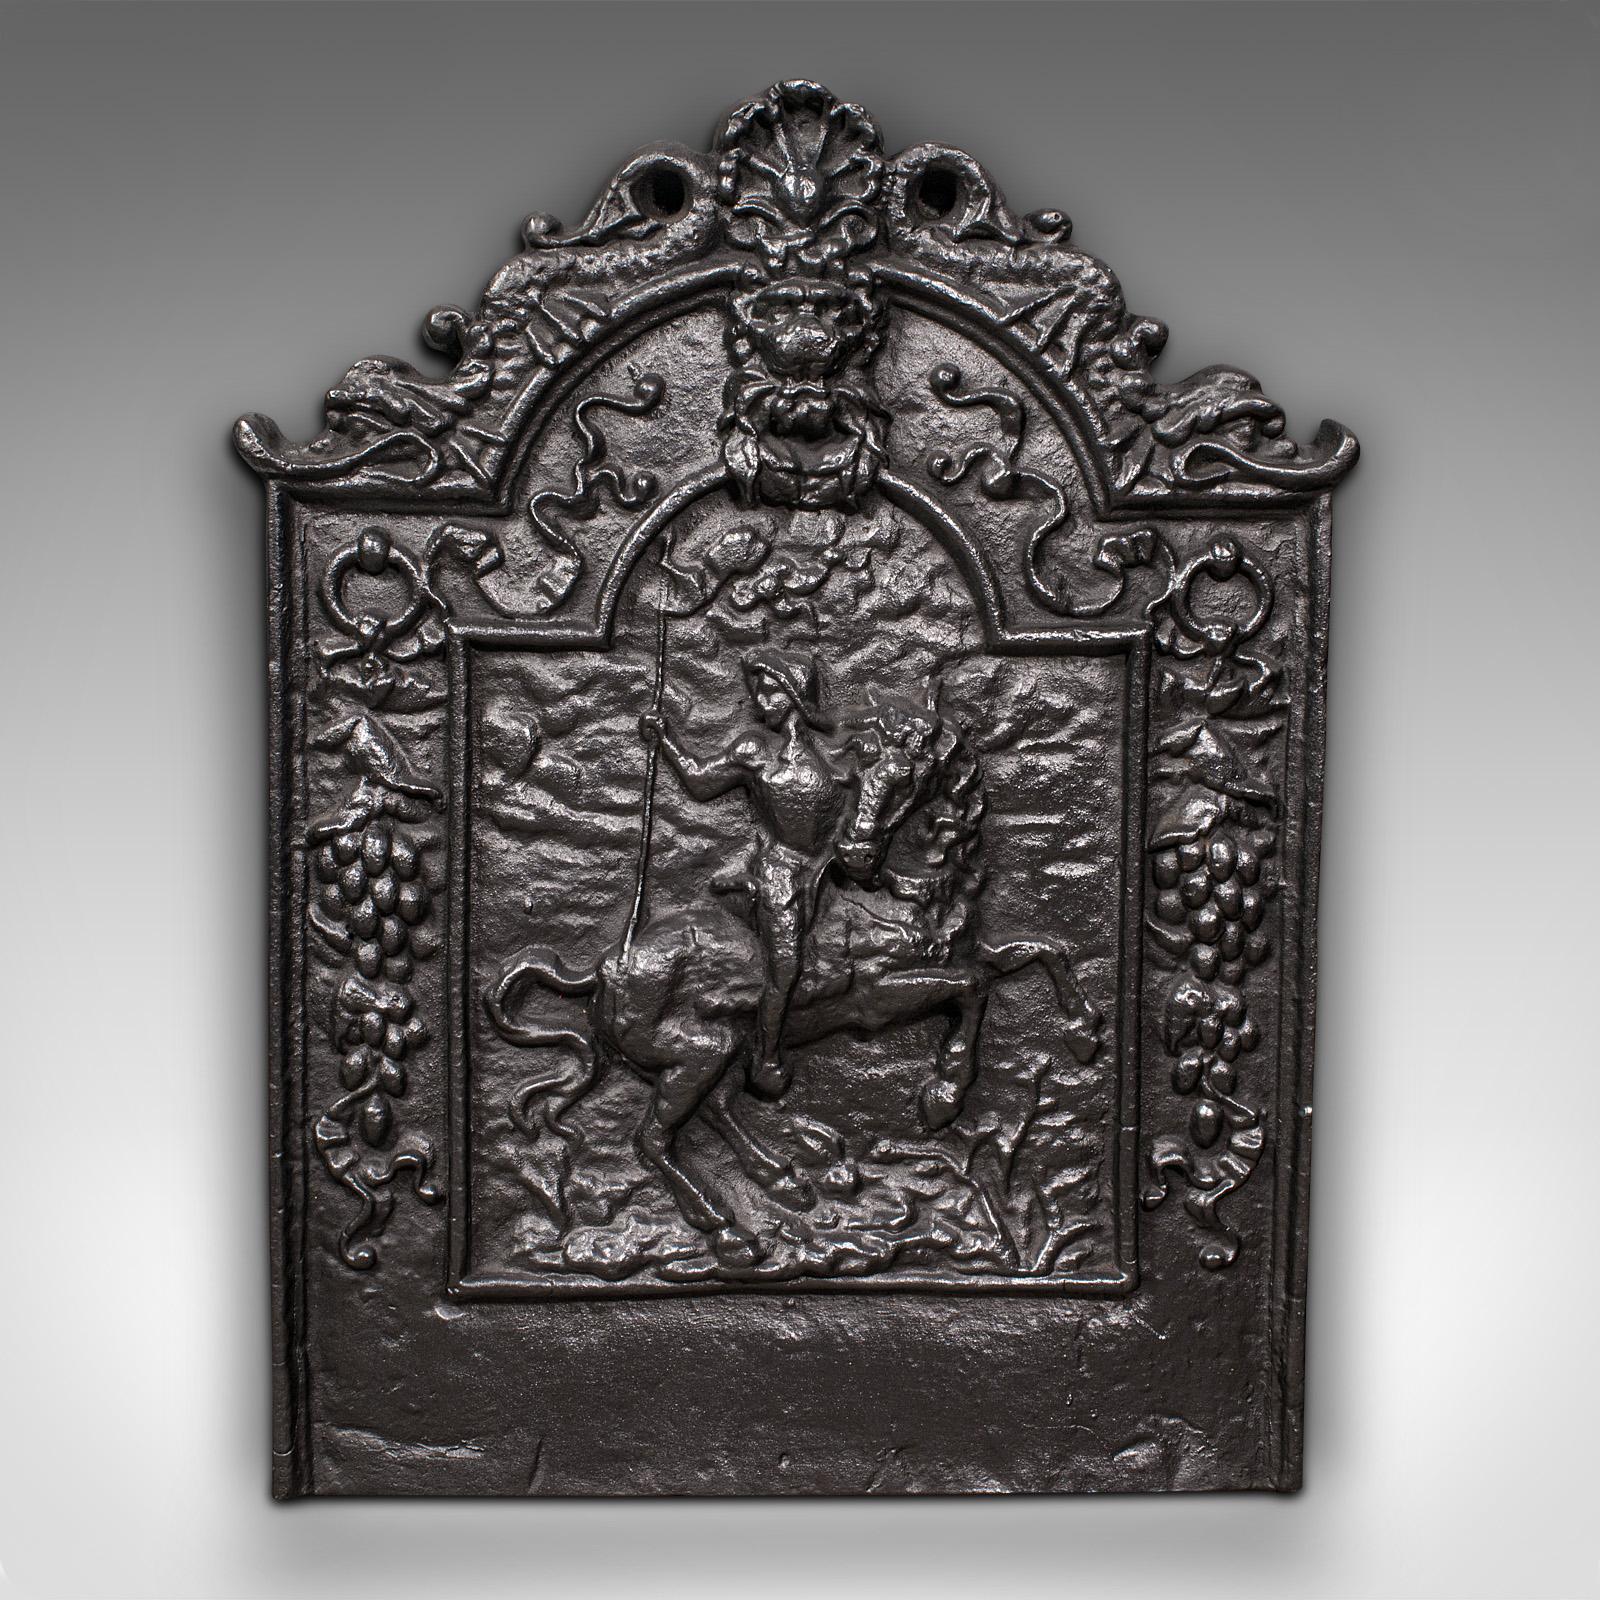 This is an antique fire back. An English, cast iron decorative fireplace back, dating to the Victorian period, circa 1900.

Charmingly ornate cast fire back with superb relief detail
Displays a desirable aged patina and in good order
Graphite